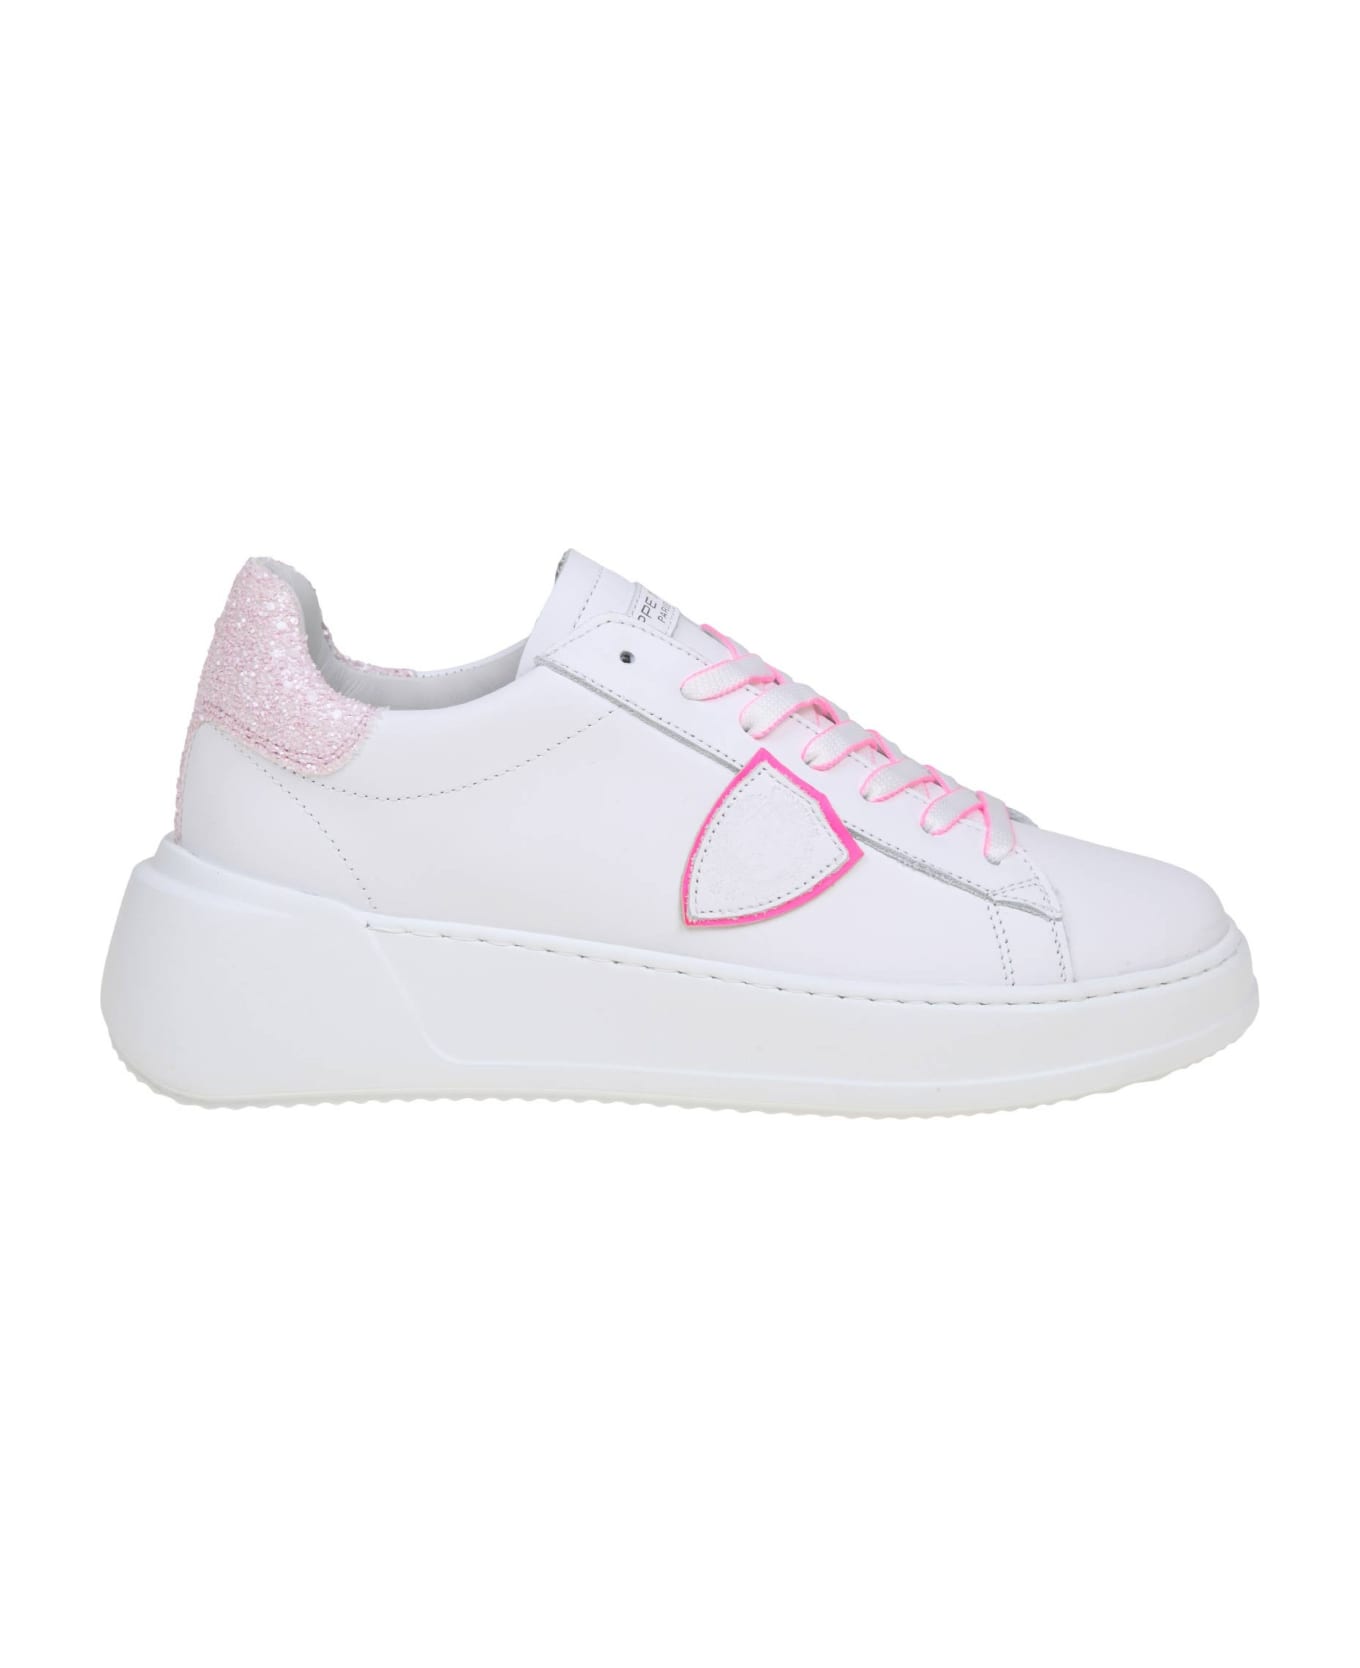 Philippe Model Tres Temple Low In White And Fuchsia Leather - Blanc/fucsia